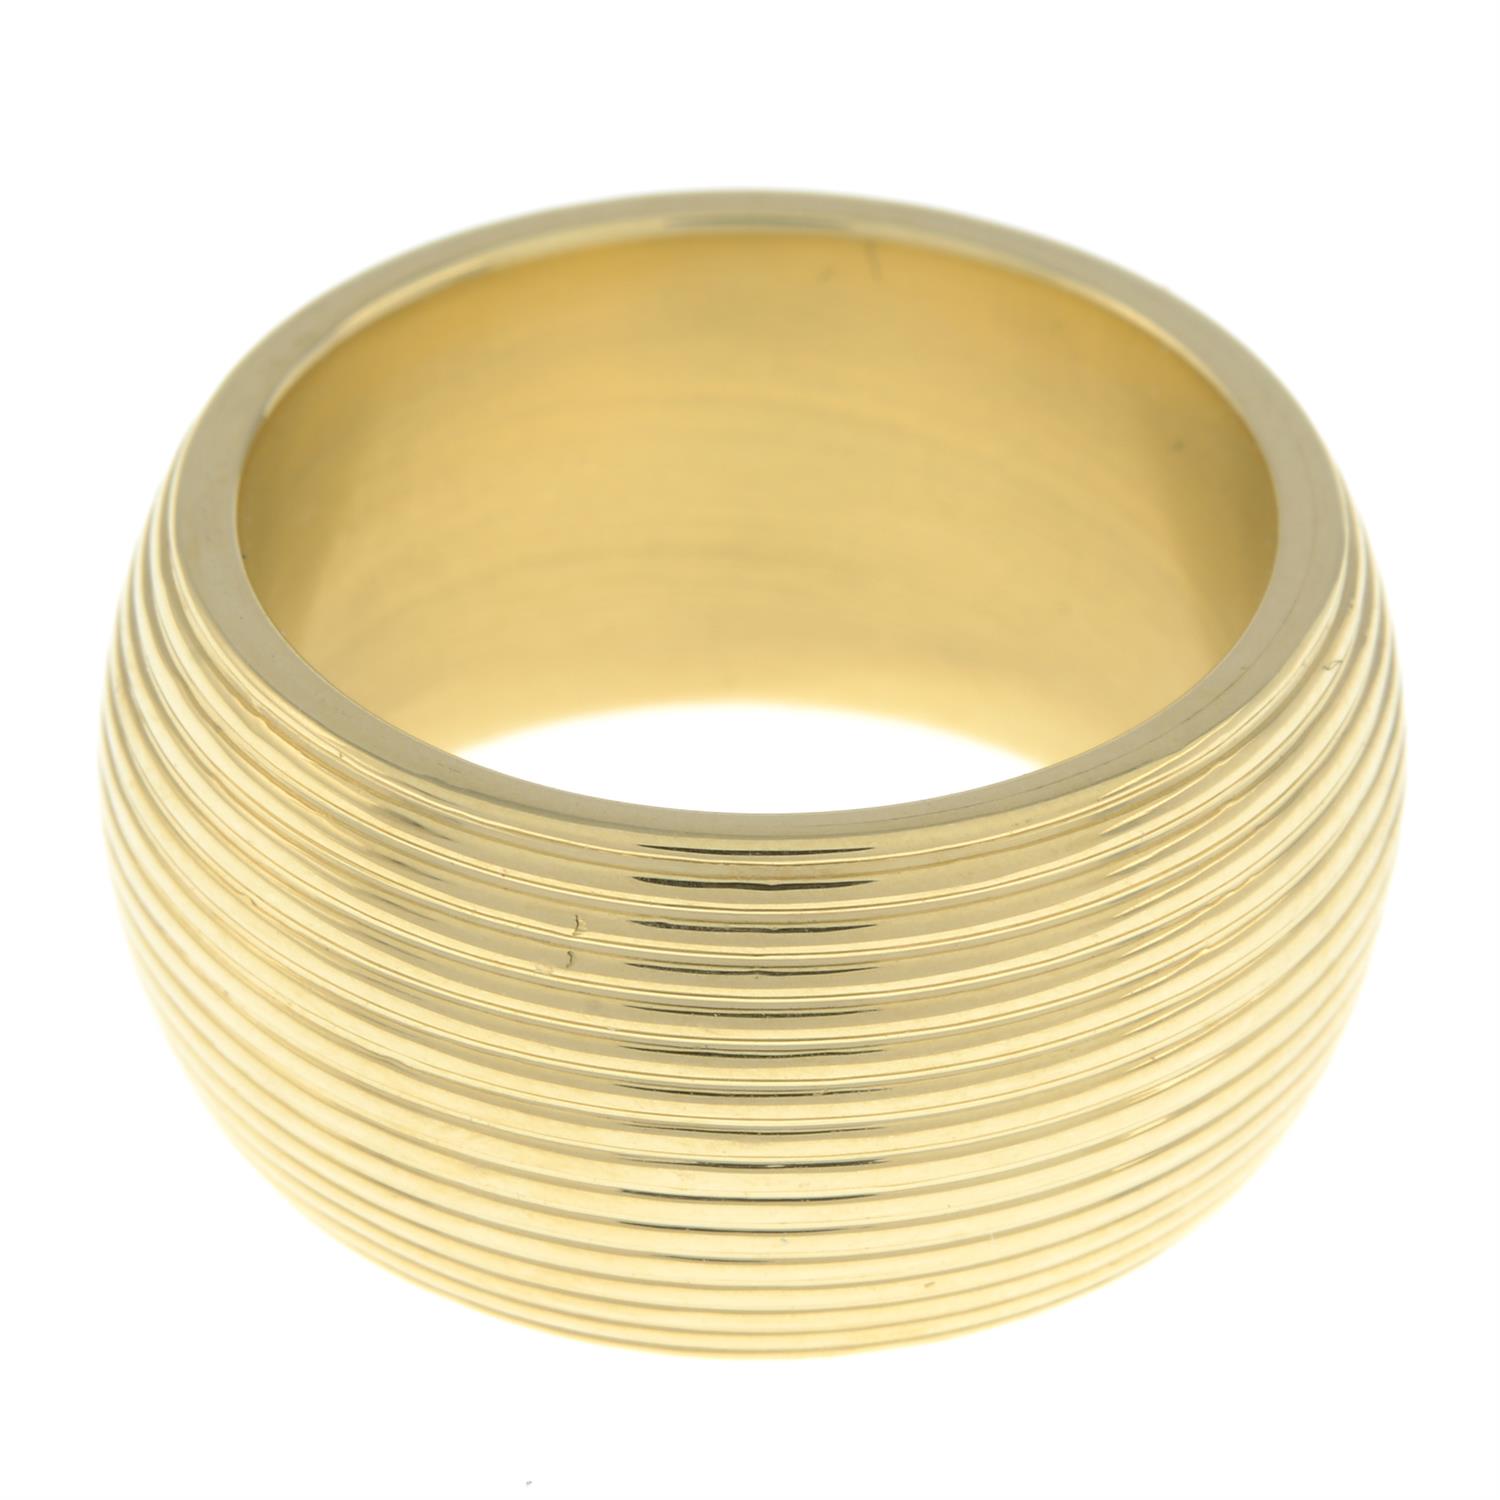 18ct gold grooved band ring - Image 3 of 5